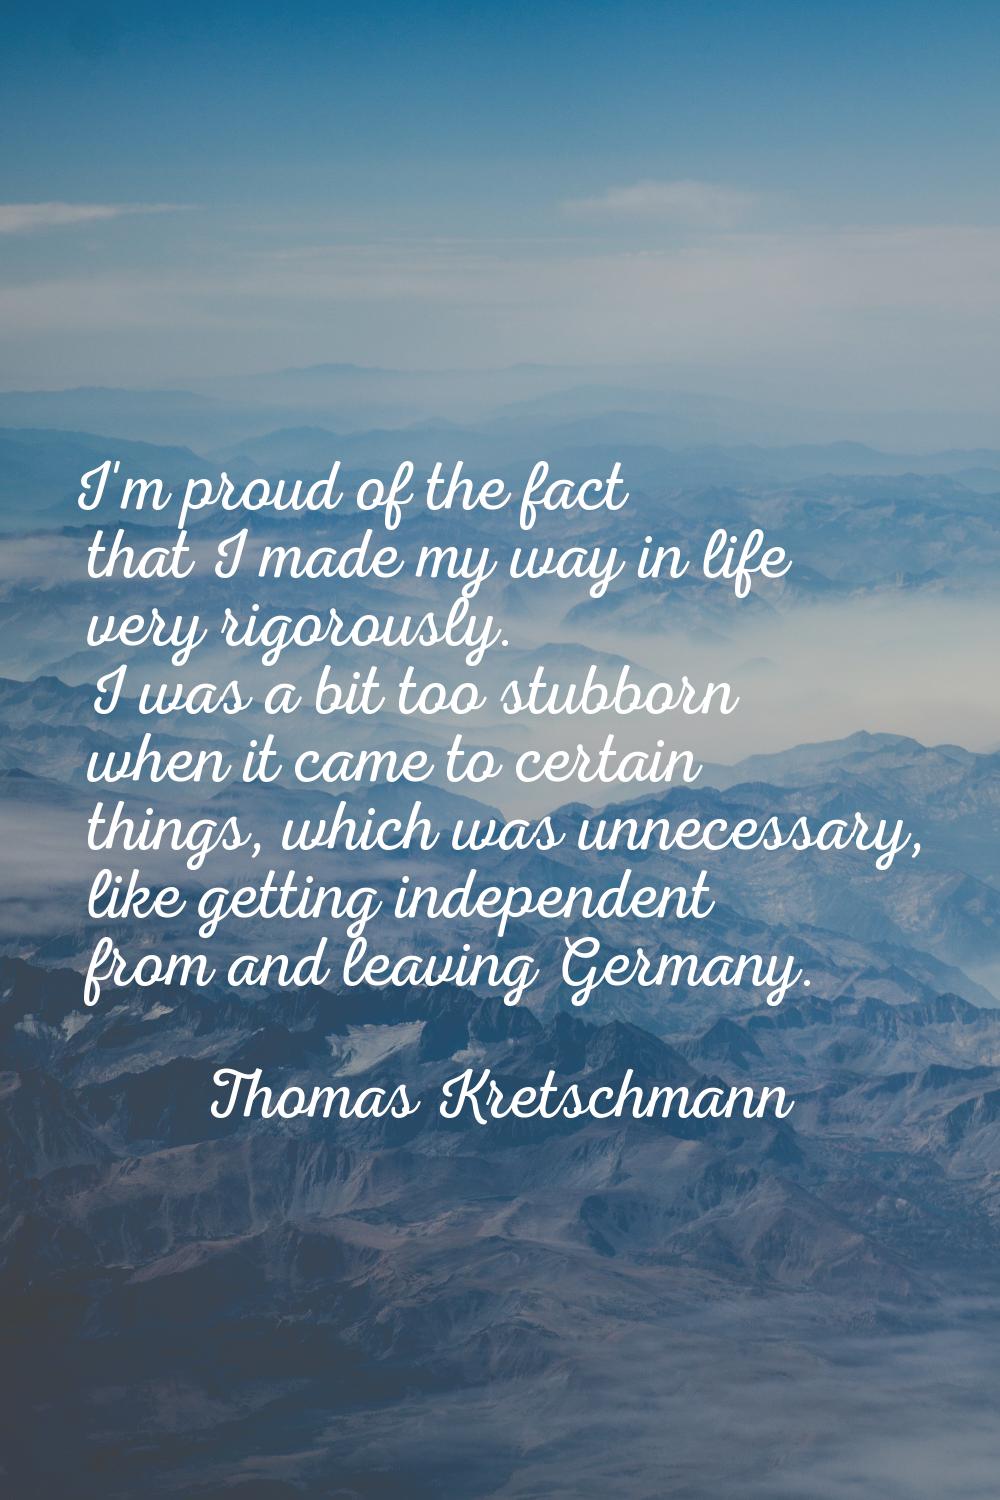 I'm proud of the fact that I made my way in life very rigorously. I was a bit too stubborn when it 